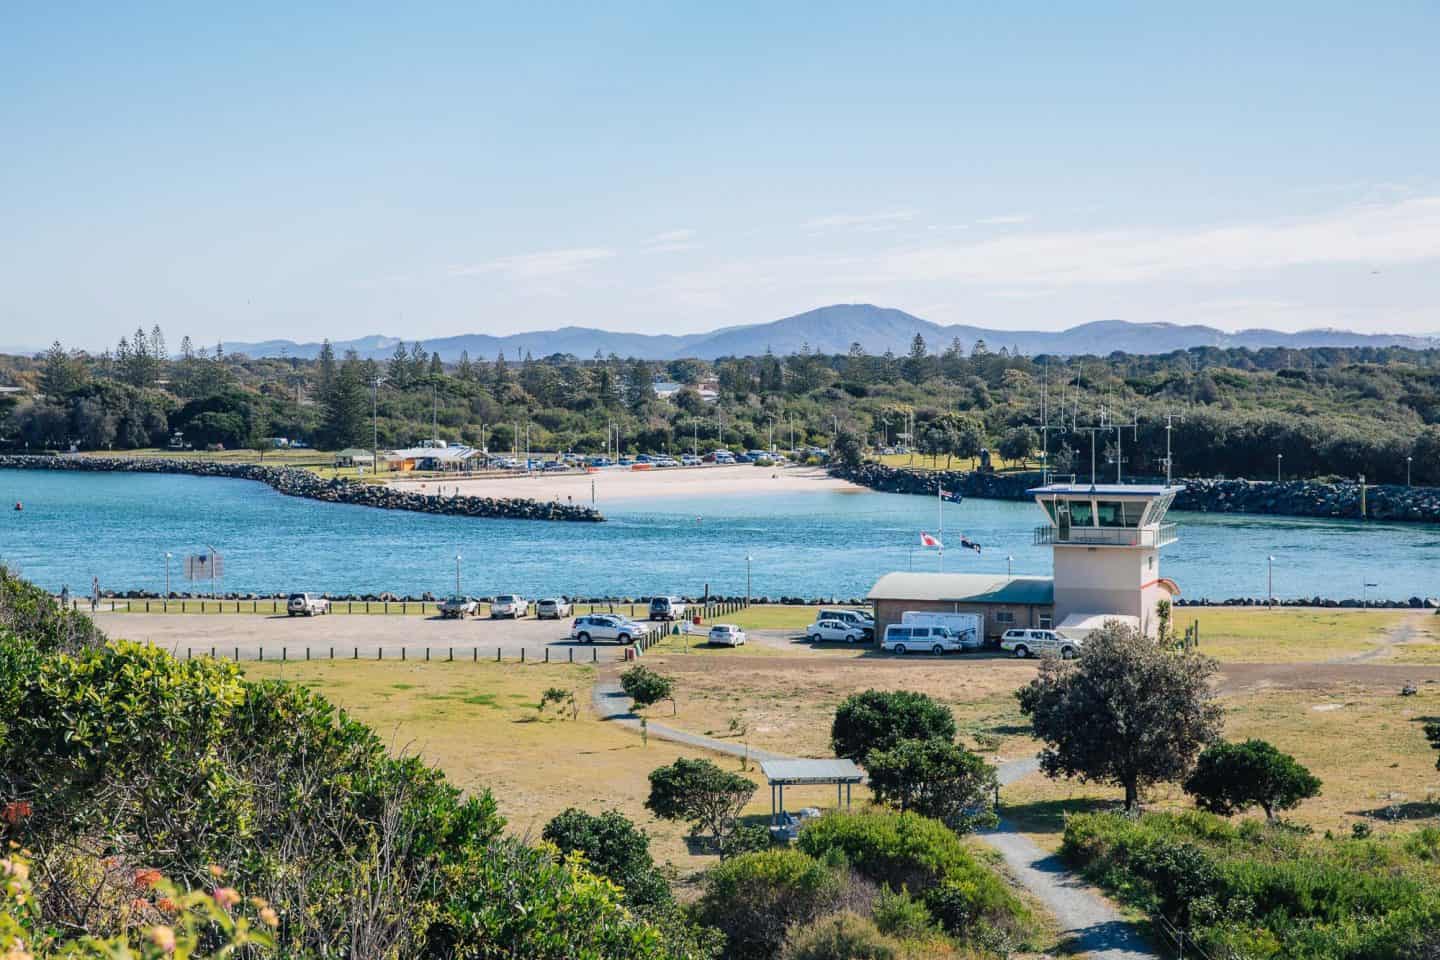 Forster nsw, things to do in forster, what to do in forster, things to do forster, camping in forster, beaches in forster, beaches at forster, forster beach, forster main beach